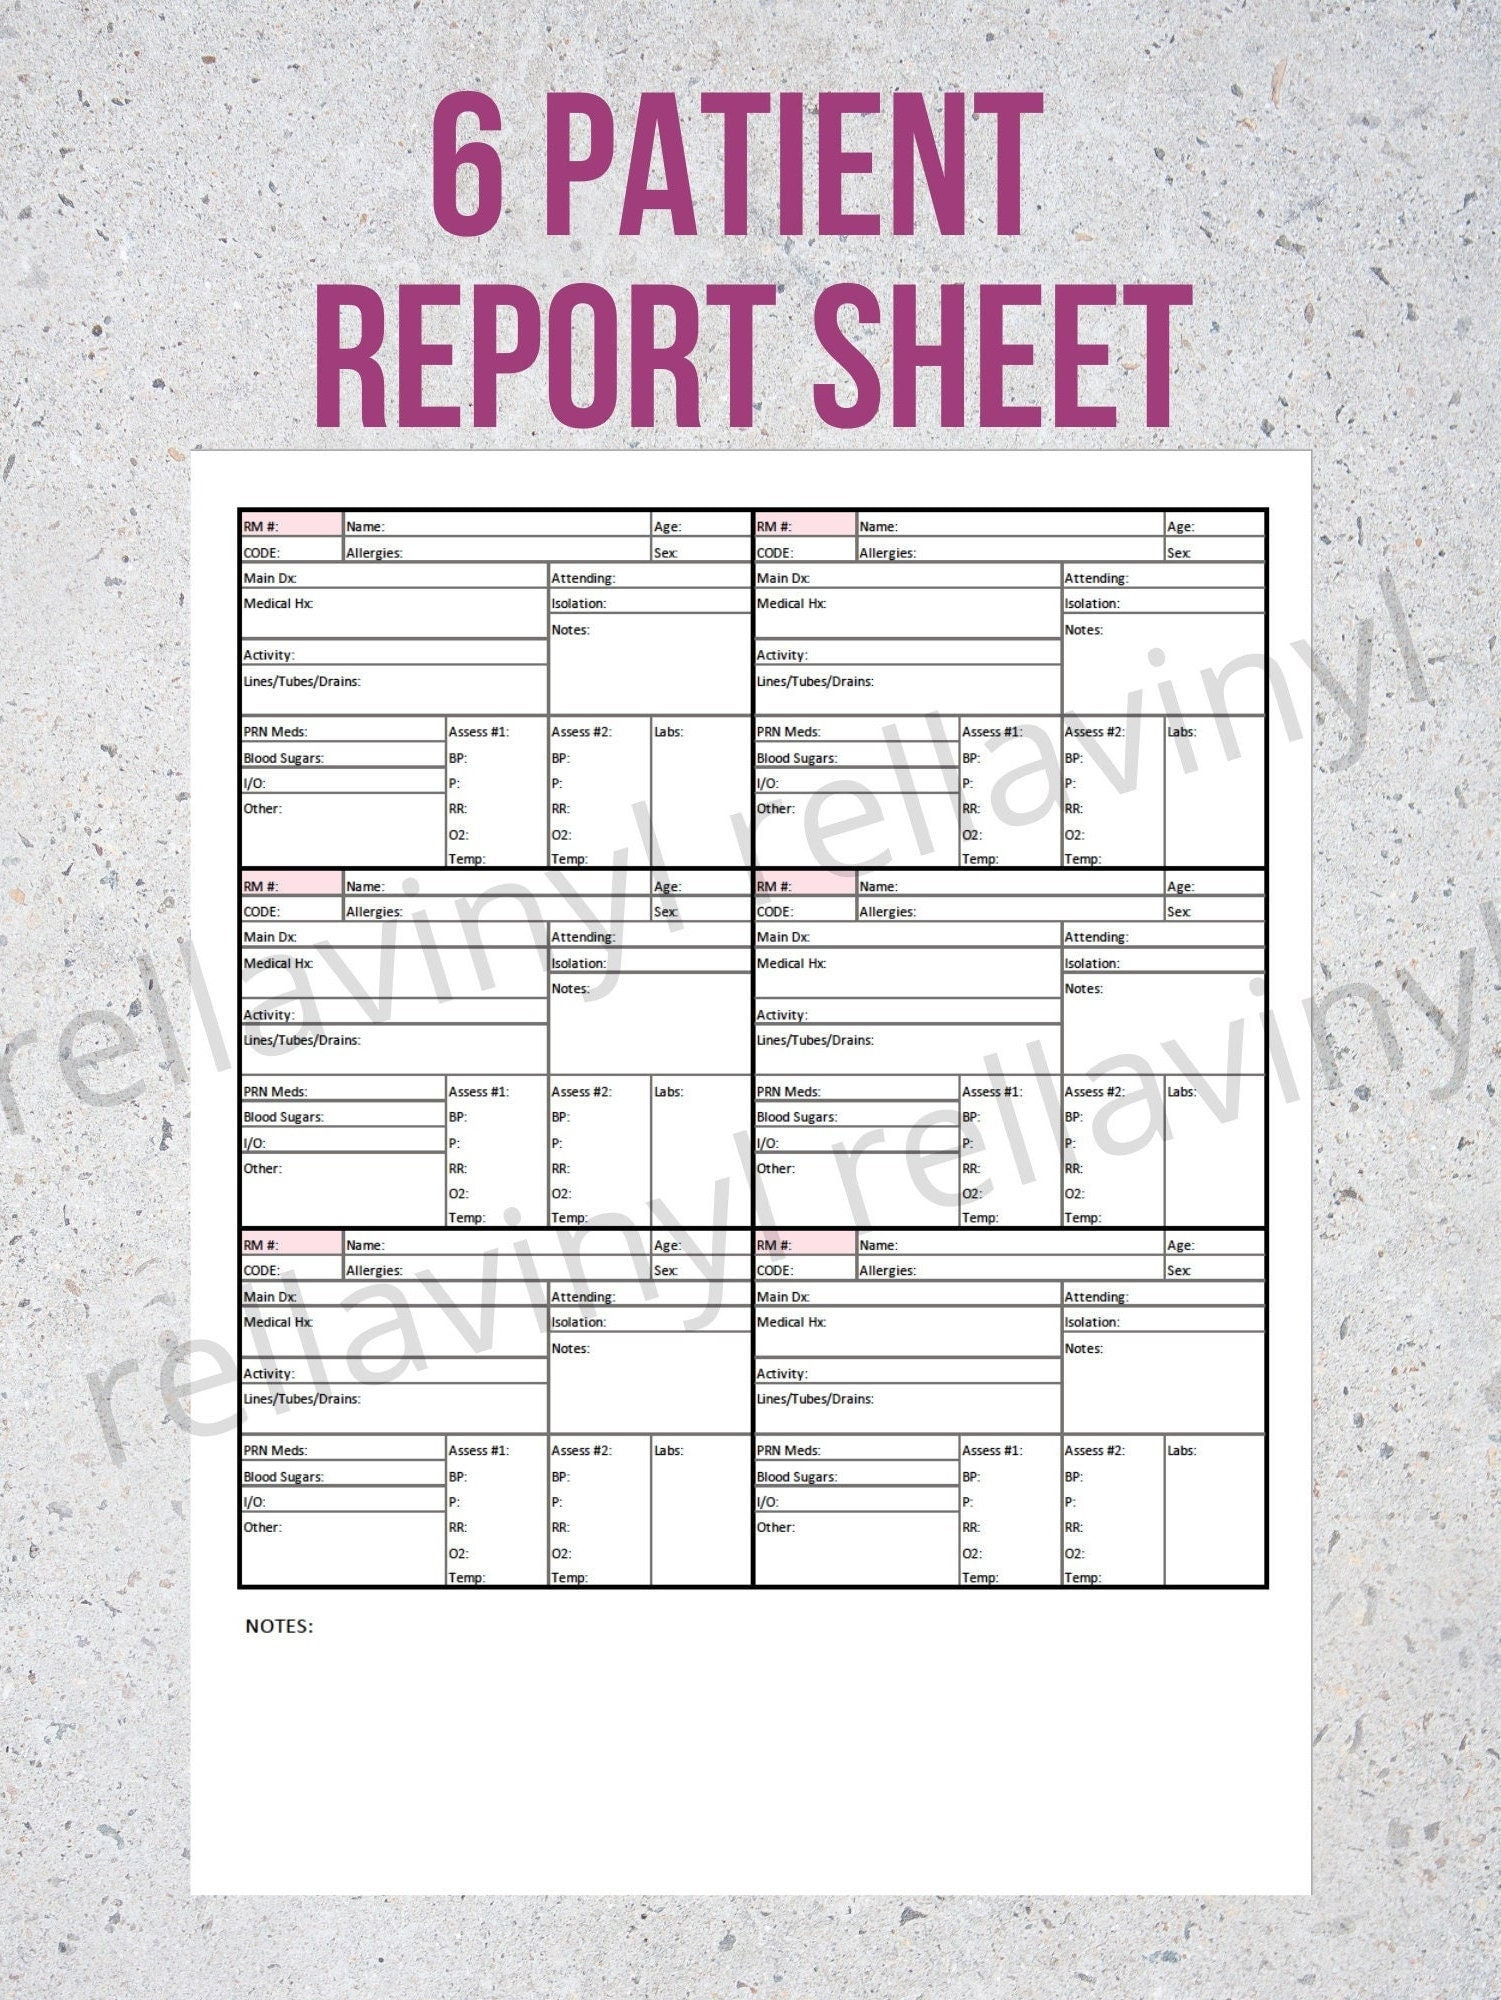 10 Patient Nurse Report Sheet - Great for Med/Surg! - Instant Download With Regard To Med Surg Report Sheet Templates